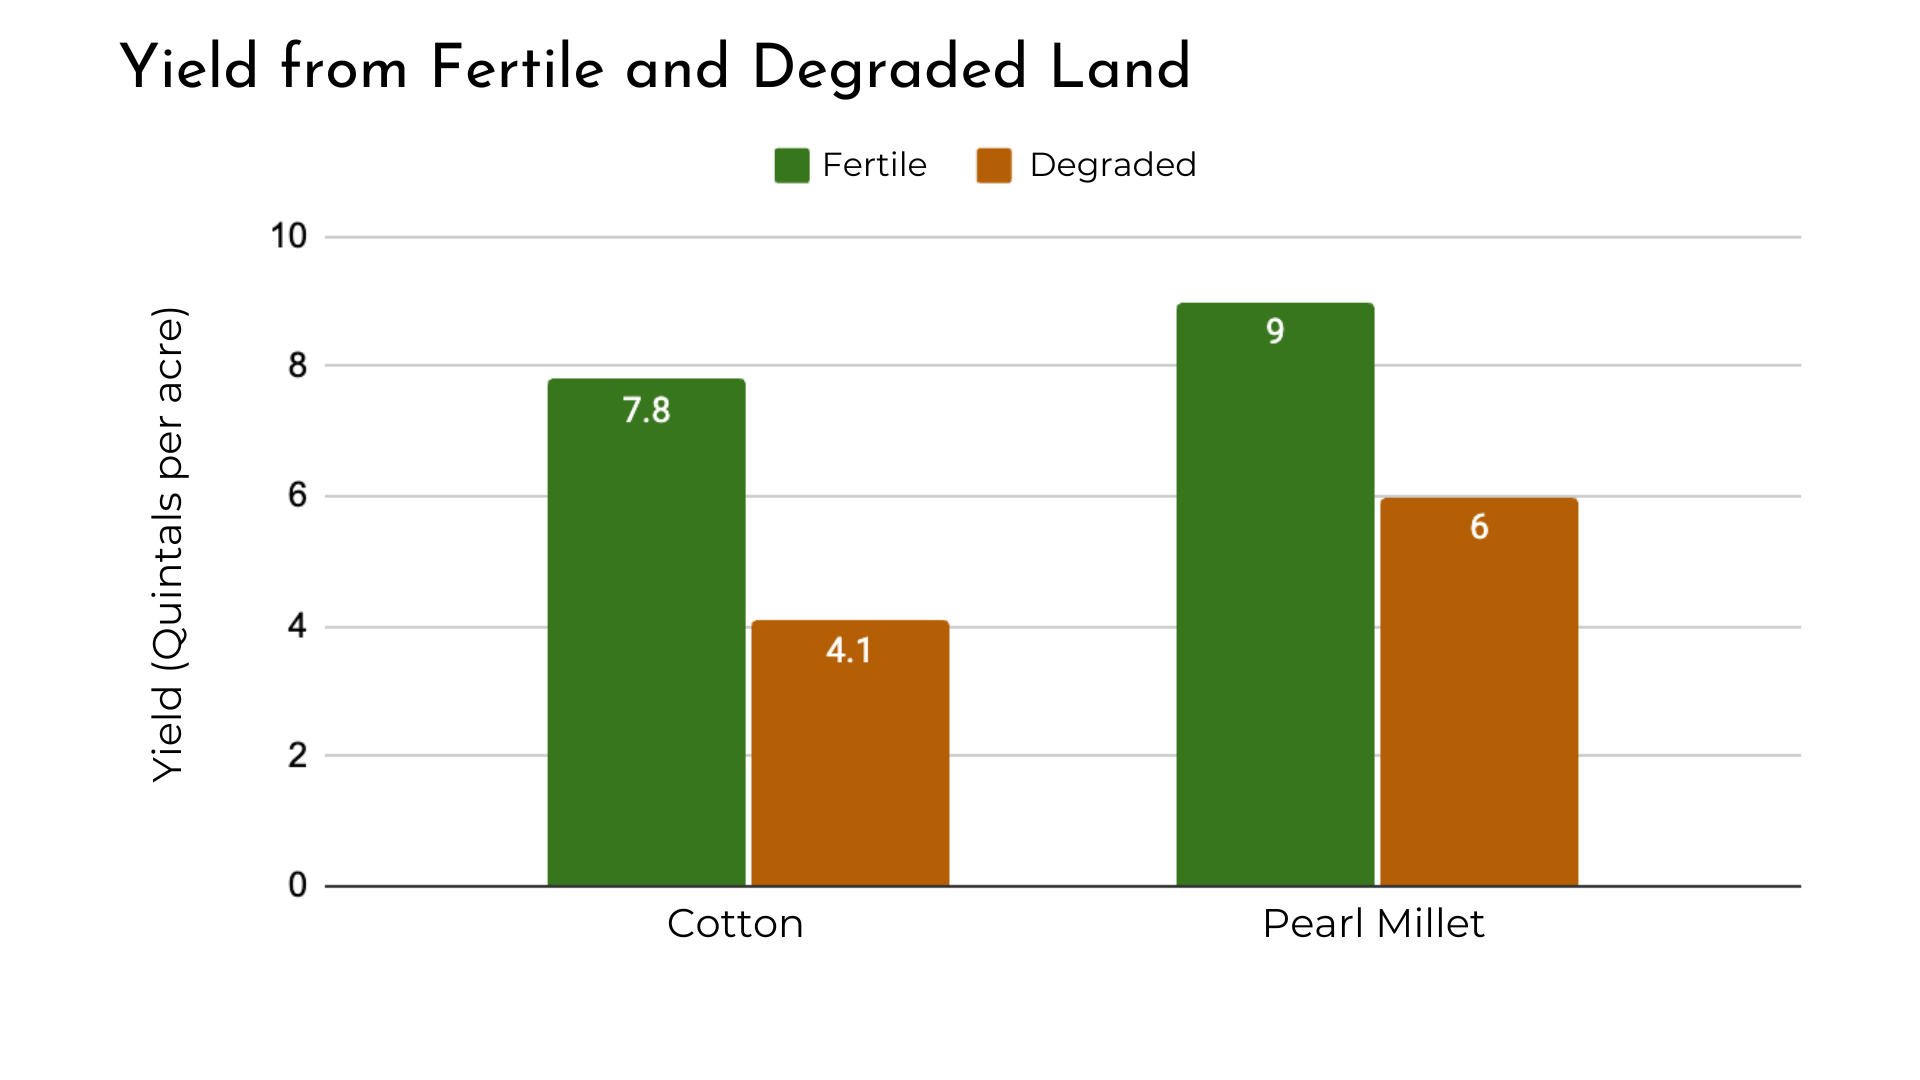 Figure 1: A comparison of yield between fertile and degraded land in Raichur. This data was collected during a journey mapping exercise we conducted.